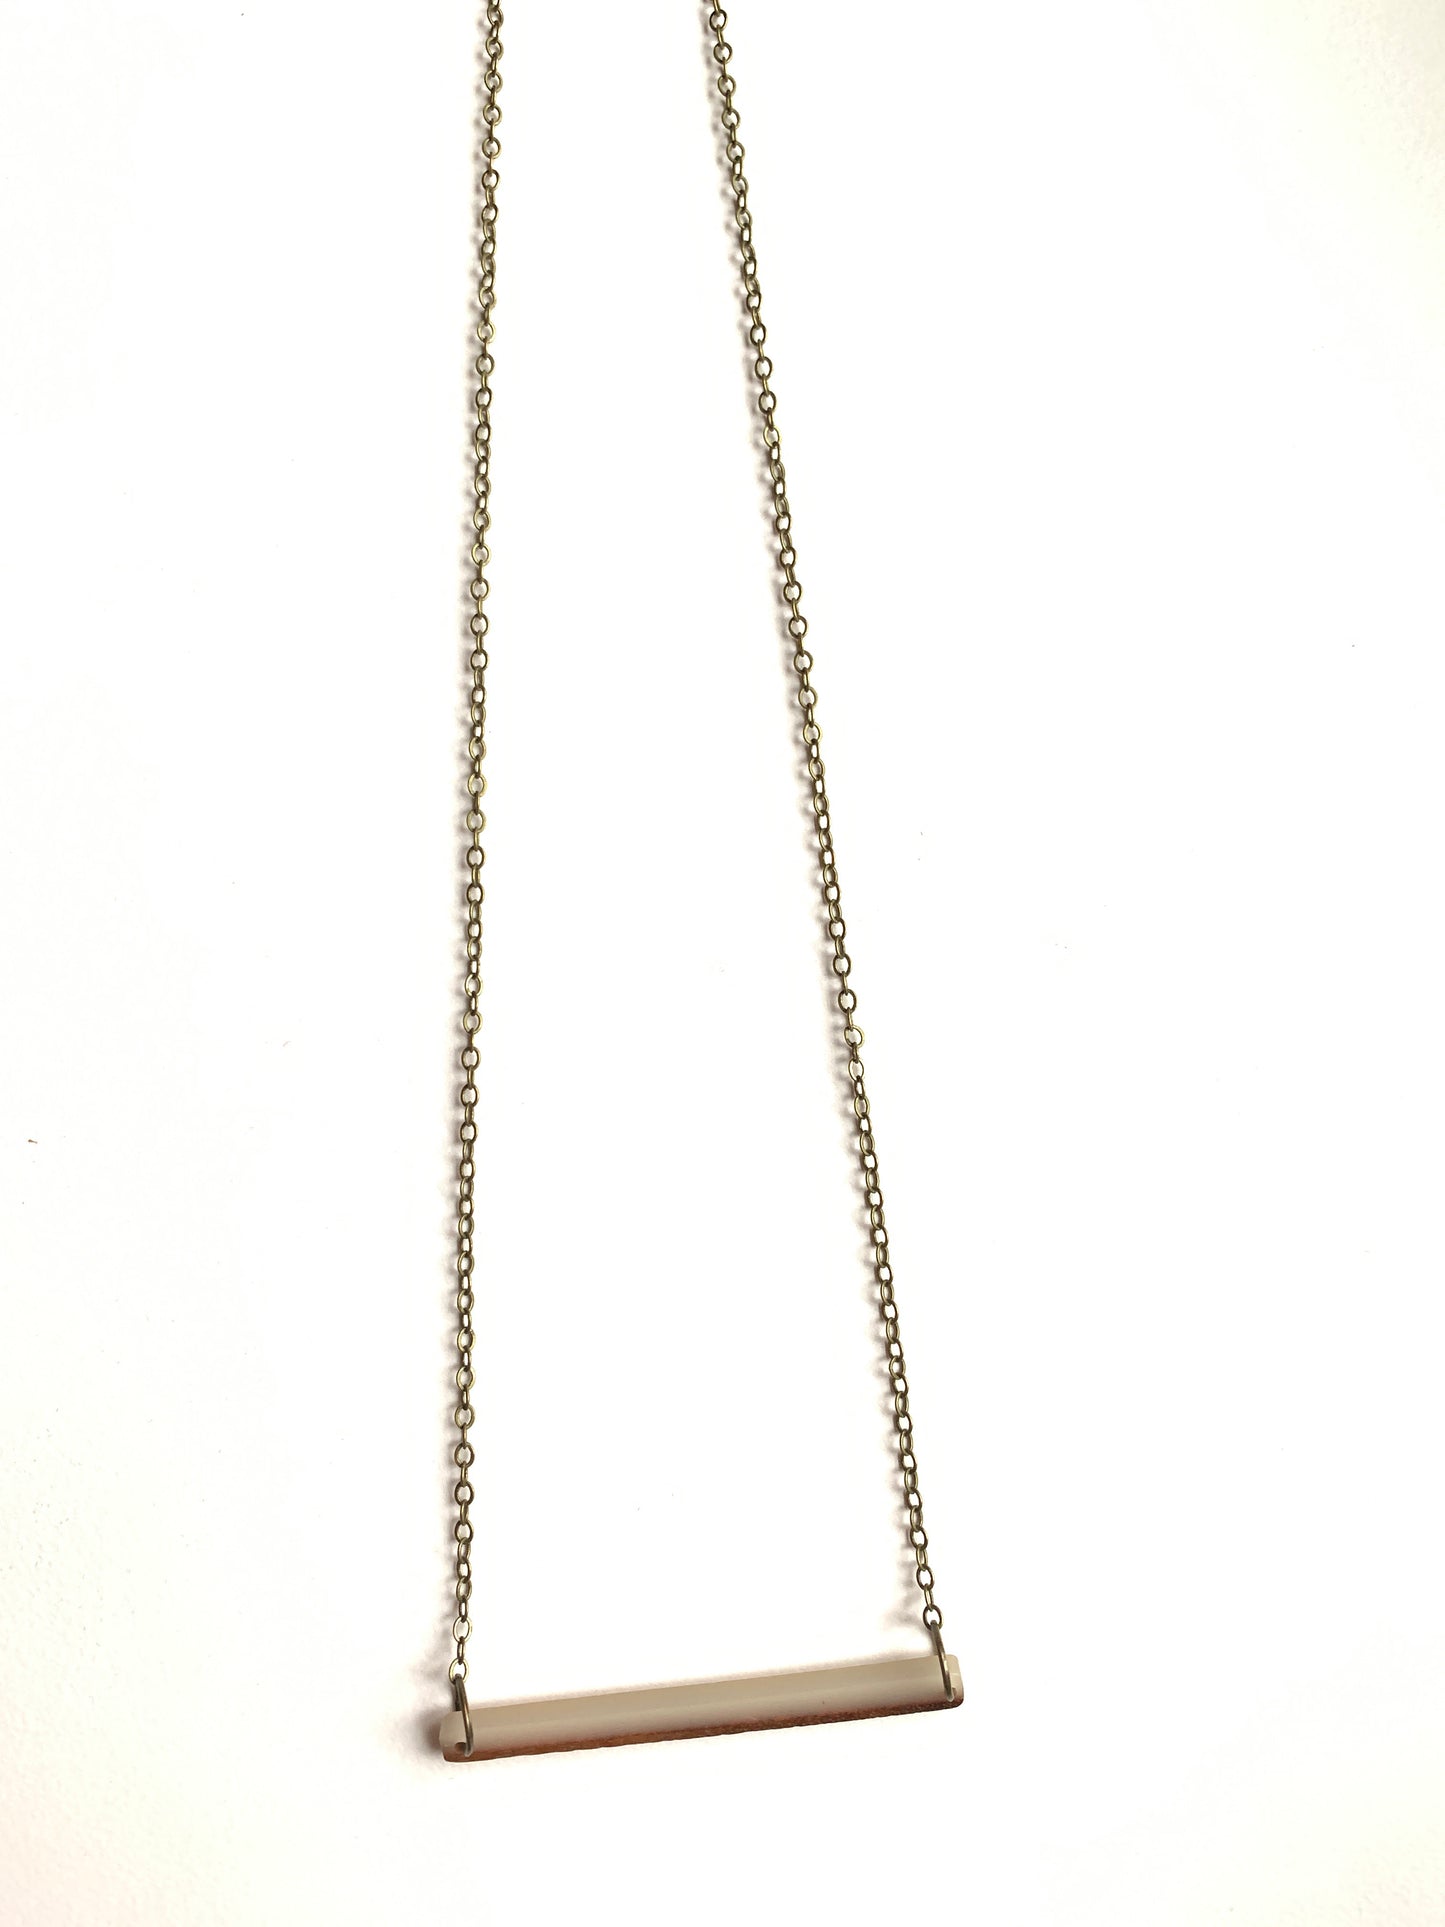 THE LONG BAR NECKLACE